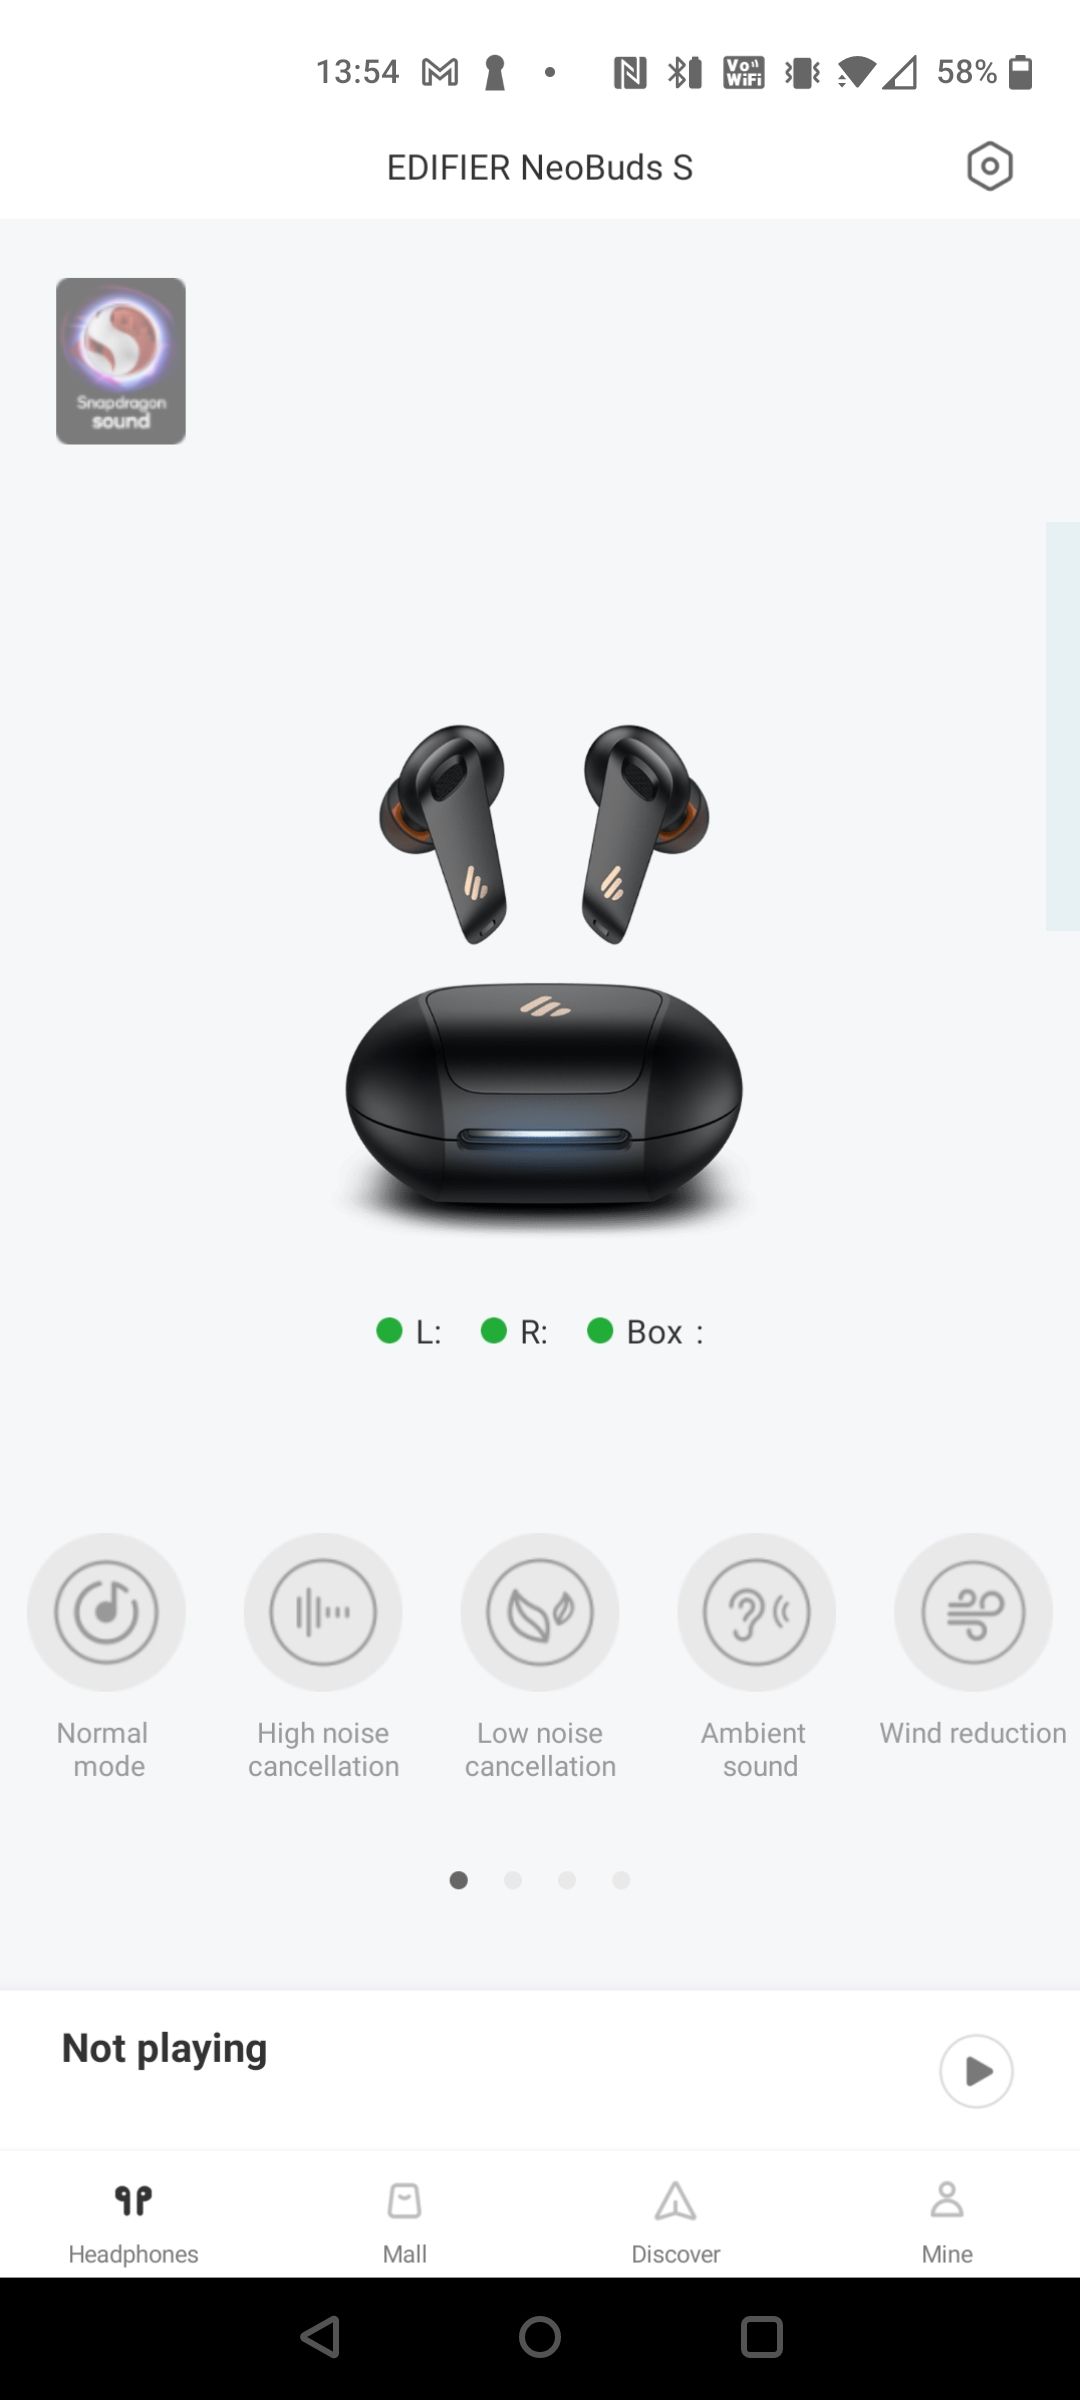 edifier neobuds s connect app home